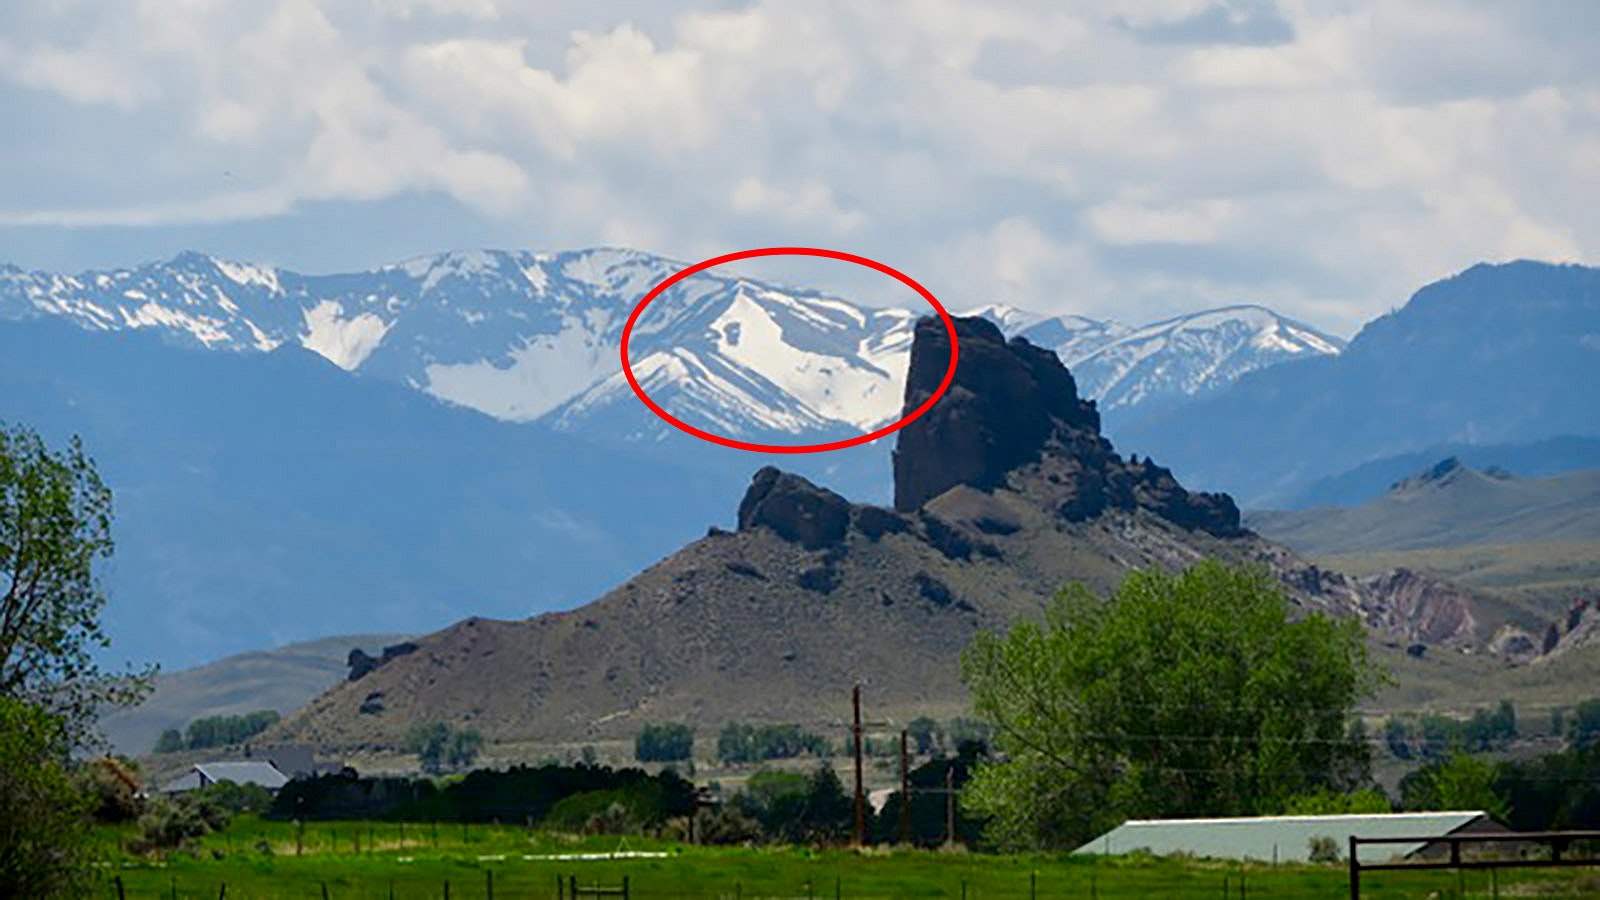 The spring snowmelt every year in the Absaroka Range above Cody, Wyoming, reveals a truly Wyoming-appropriate phenomenon — the Ishawooa Snow Horse. The topography and rate of snowmelt reveals an amazingly clear sillhouette of a horse's head.